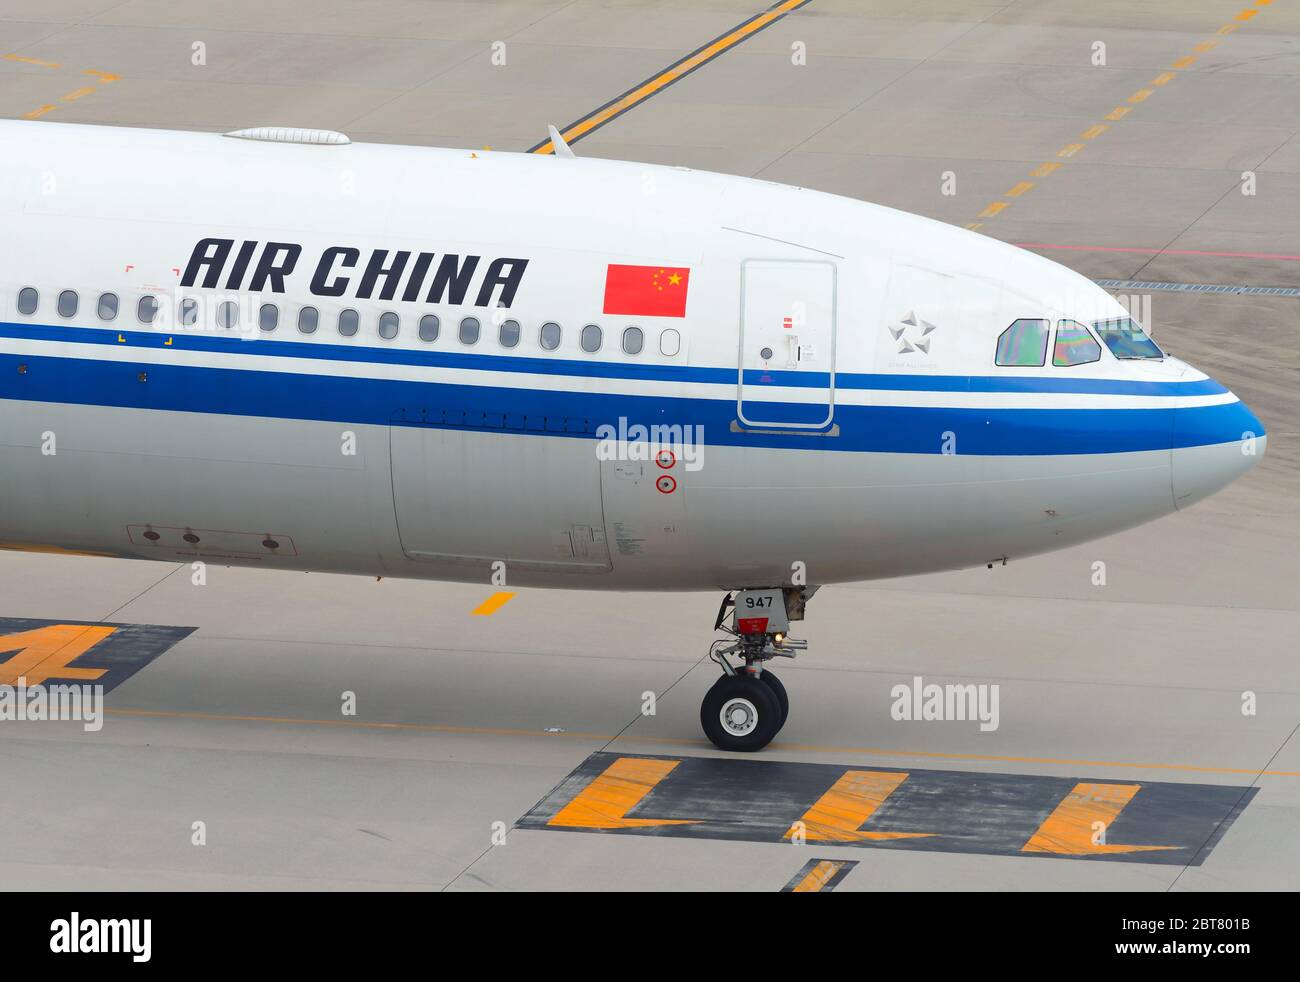 Air China Airbus A330 cabin close view showing logo and flag at Haneda Airport Tokyo Japan. B-5947 airplane. Chinese airline classic livery. Stock Photo